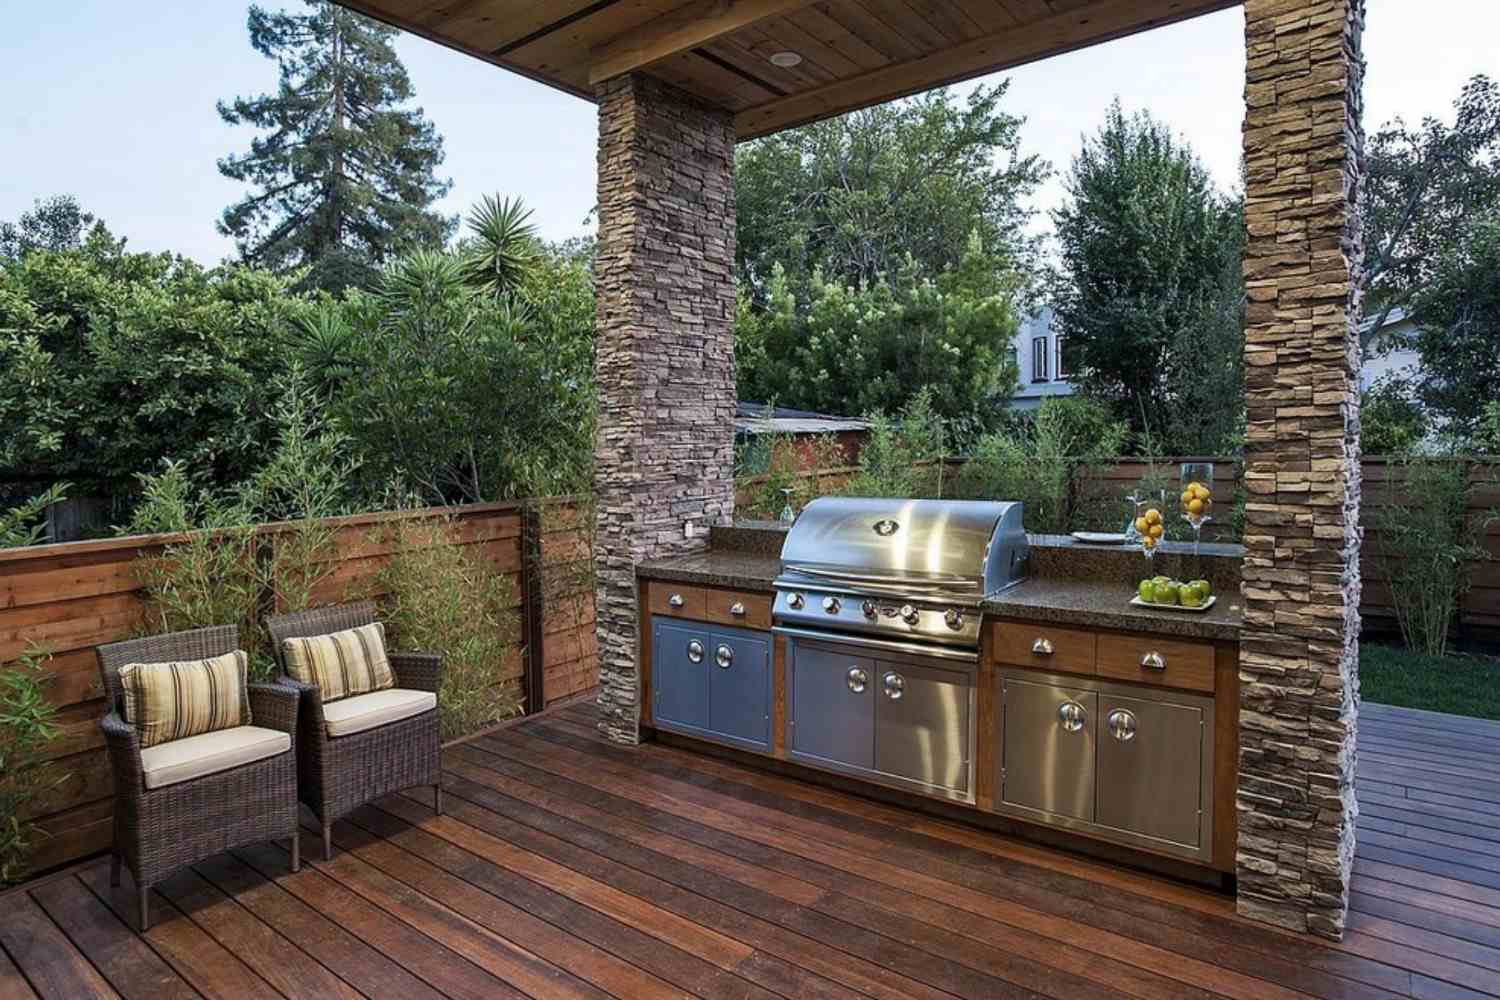 Benefits of Choosing a Leathered Granite Finish for Your Outdoor Countertops